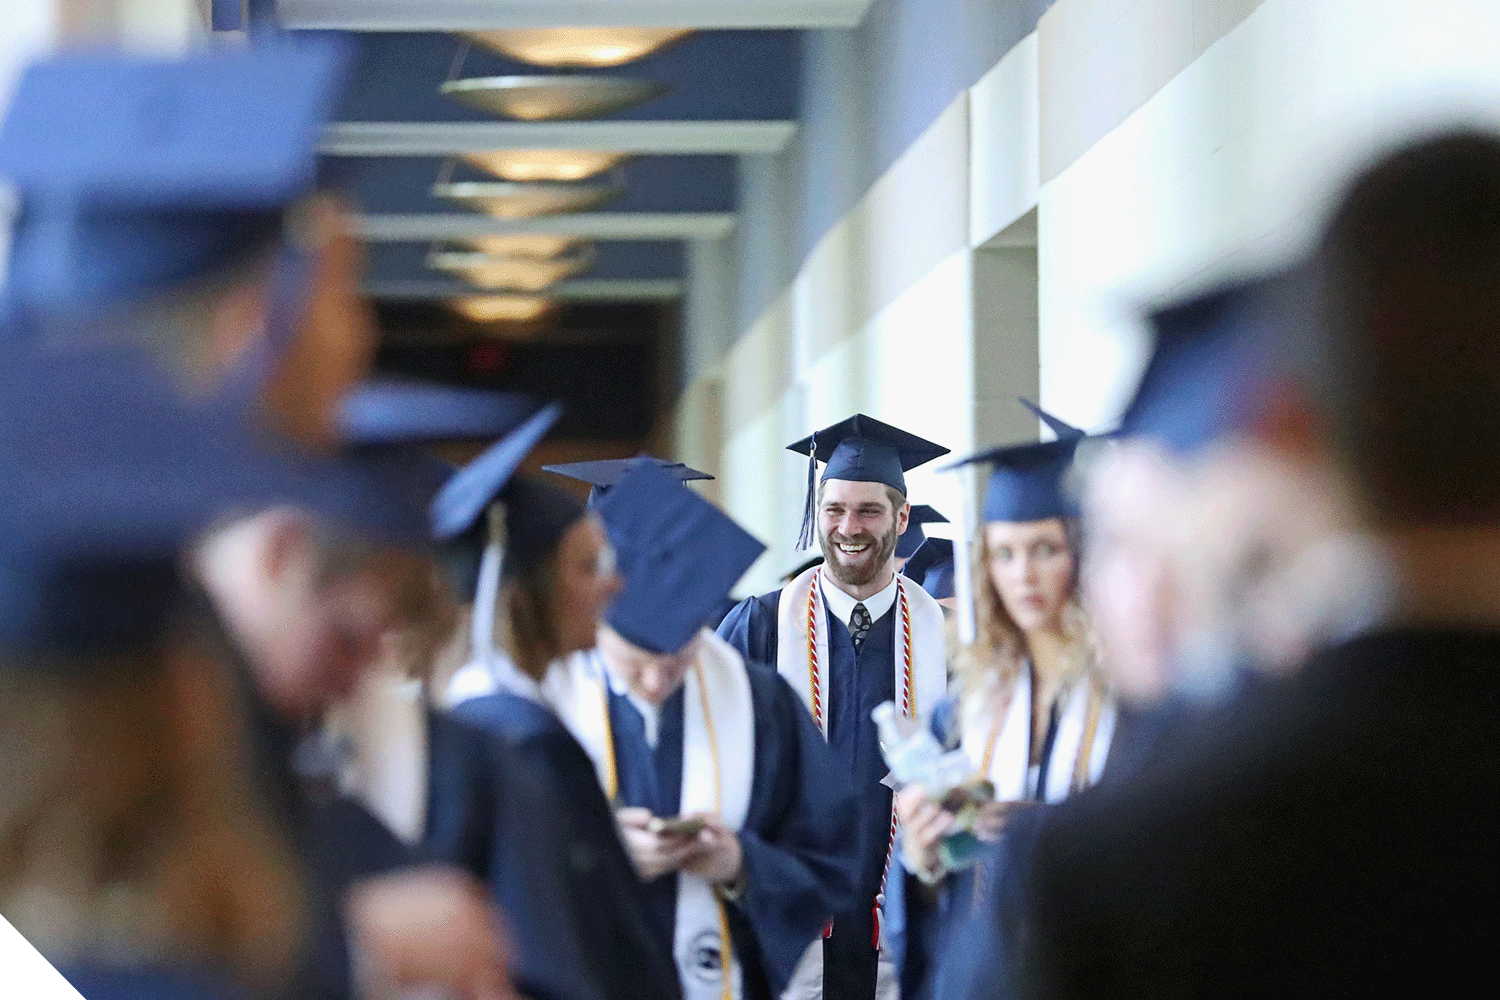 Marietta College students in caps and gowns before Commencement